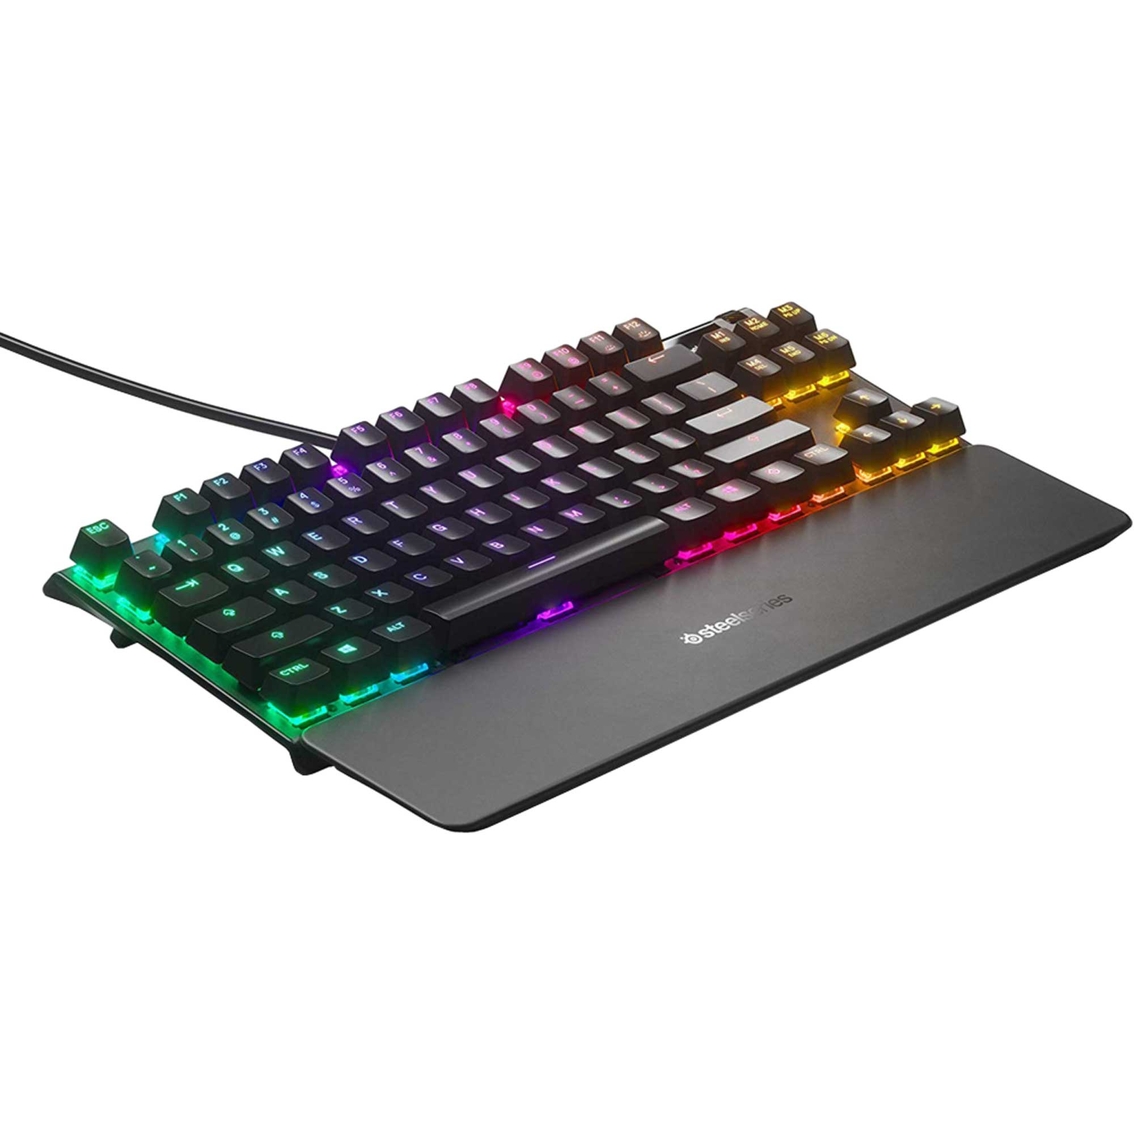 SteelSeries Apex 7 TKL Wired Gaming Mechanical Blue Switch Keyboard - Image 2 of 3